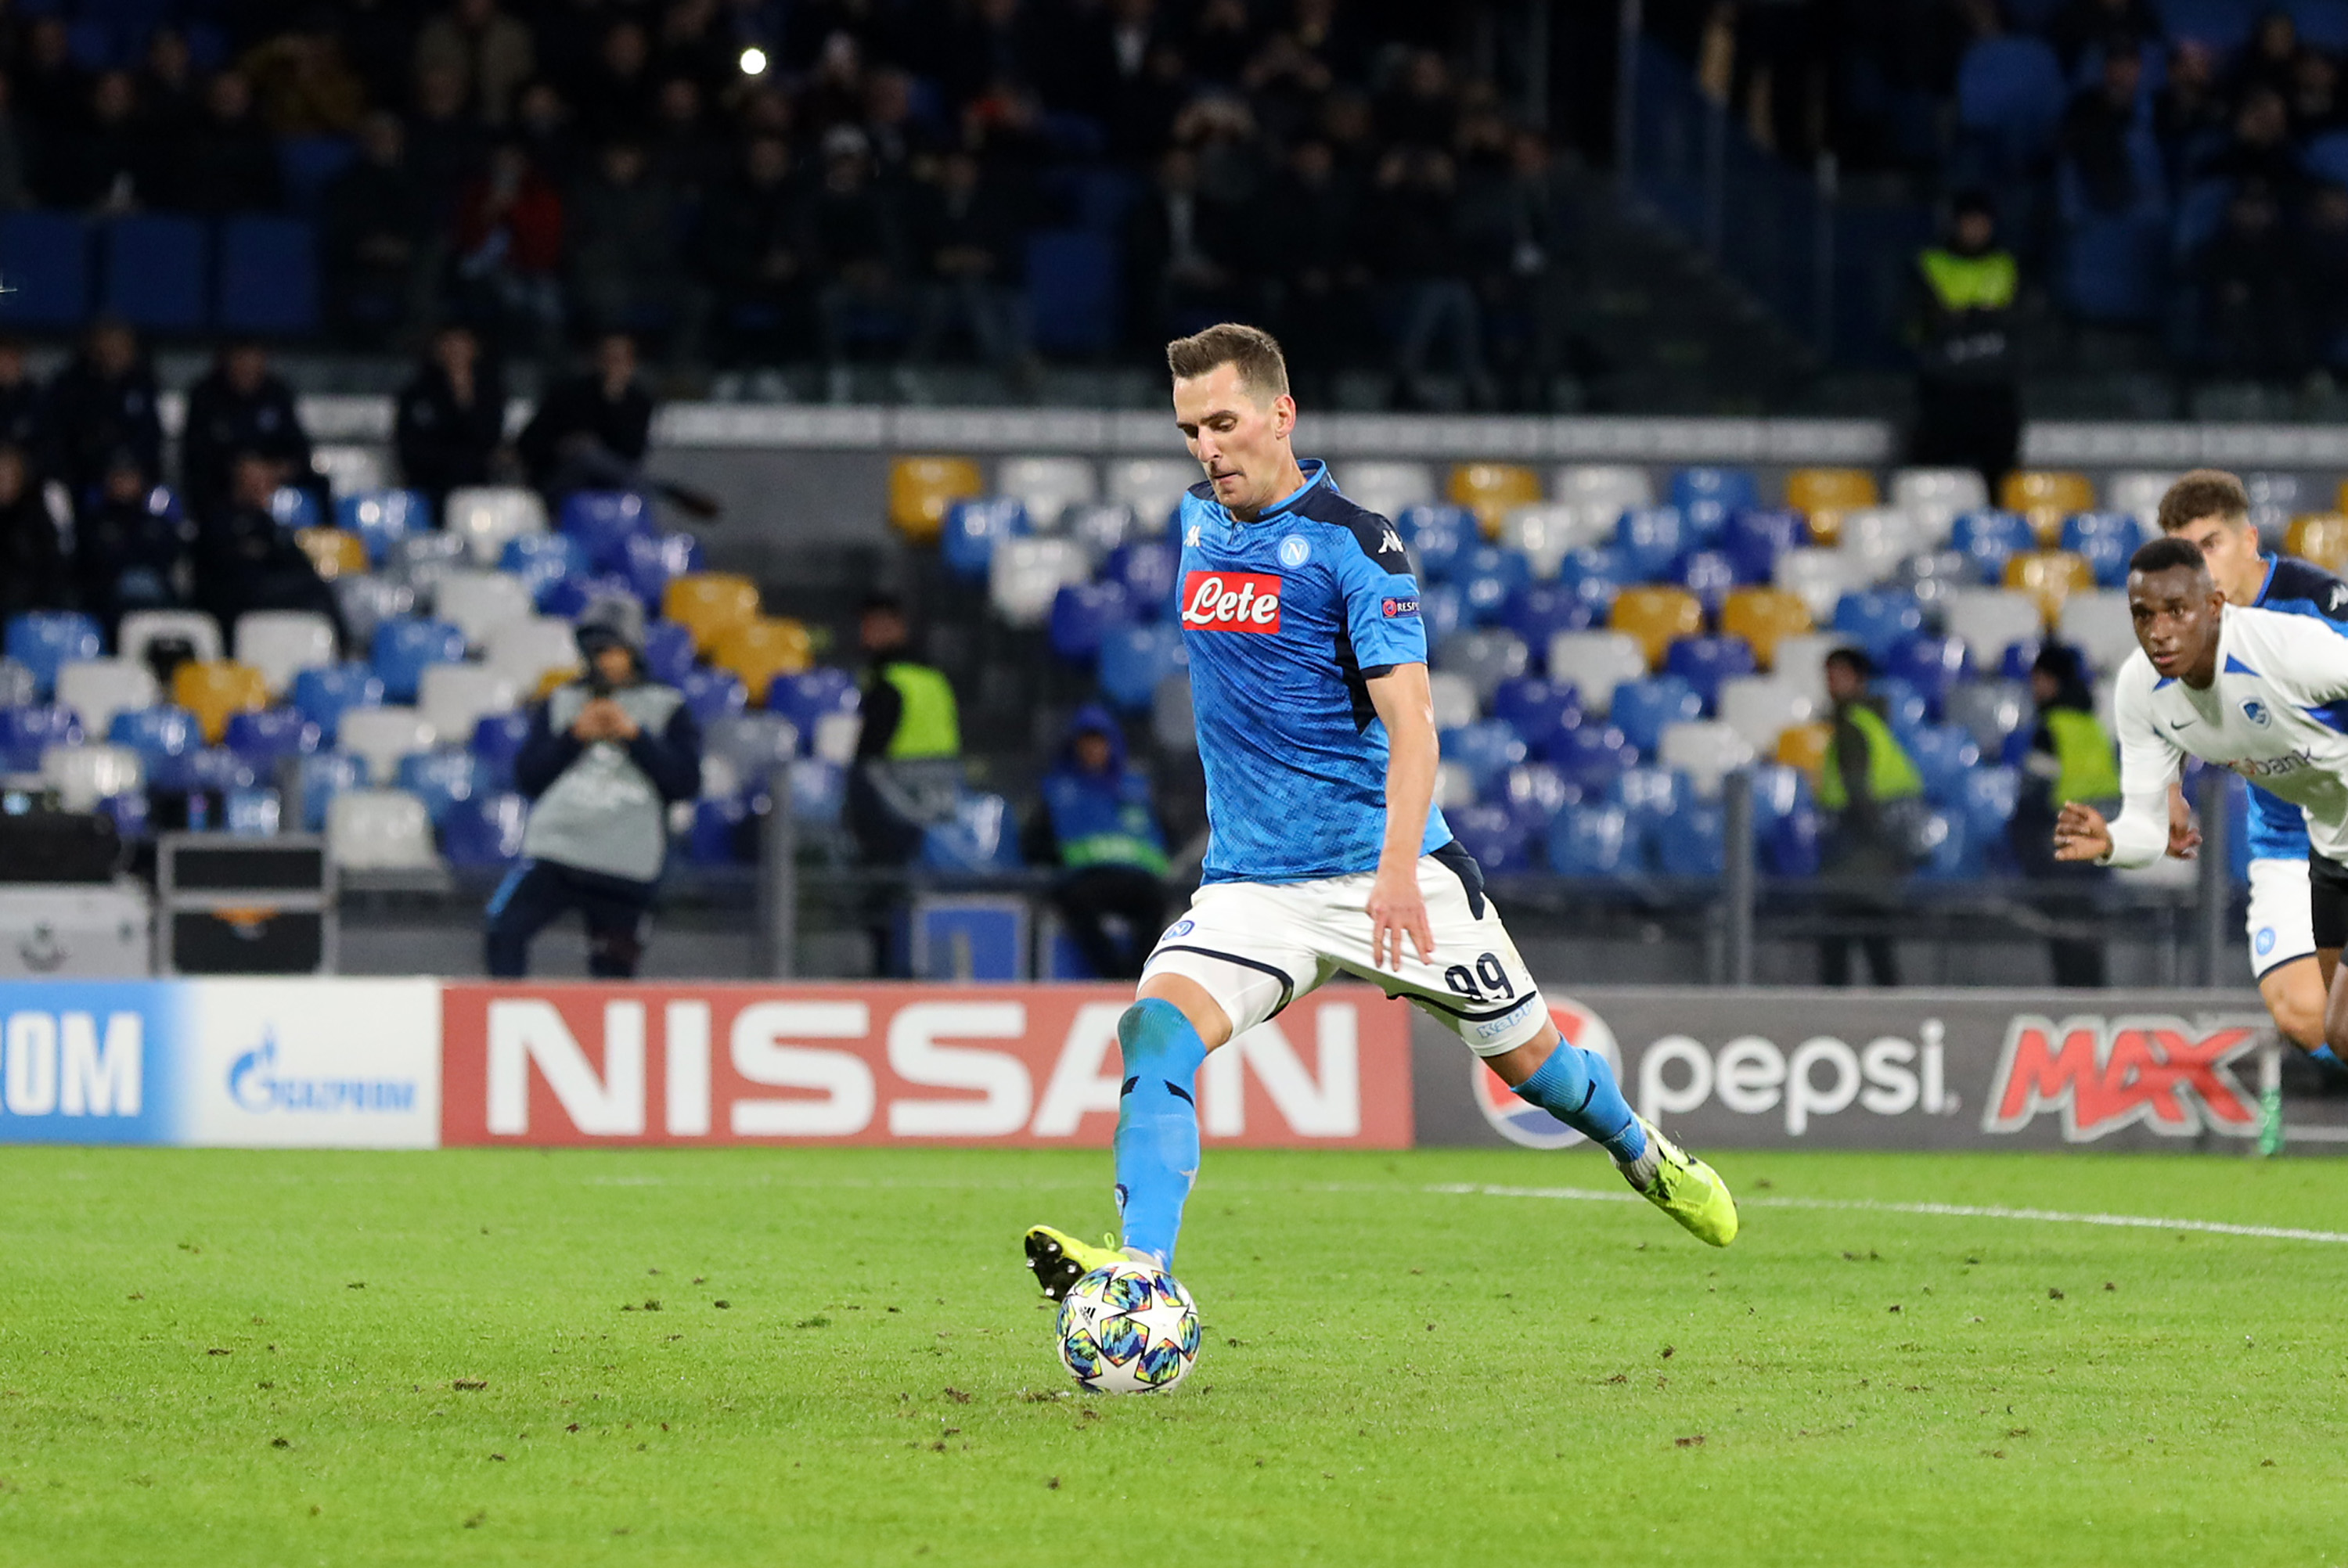 NAPLES, ITALY - DECEMBER 10: Arkadiusz Milik of SSC Napoli scores the 3-0 goal via penalty during the UEFA Champions League group E match between SSC Napoli and KRC Genk at Stadio San Paolo on December 10, 2019 in Naples, Italy. (Photo by Francesco Pecoraro/Getty Images)